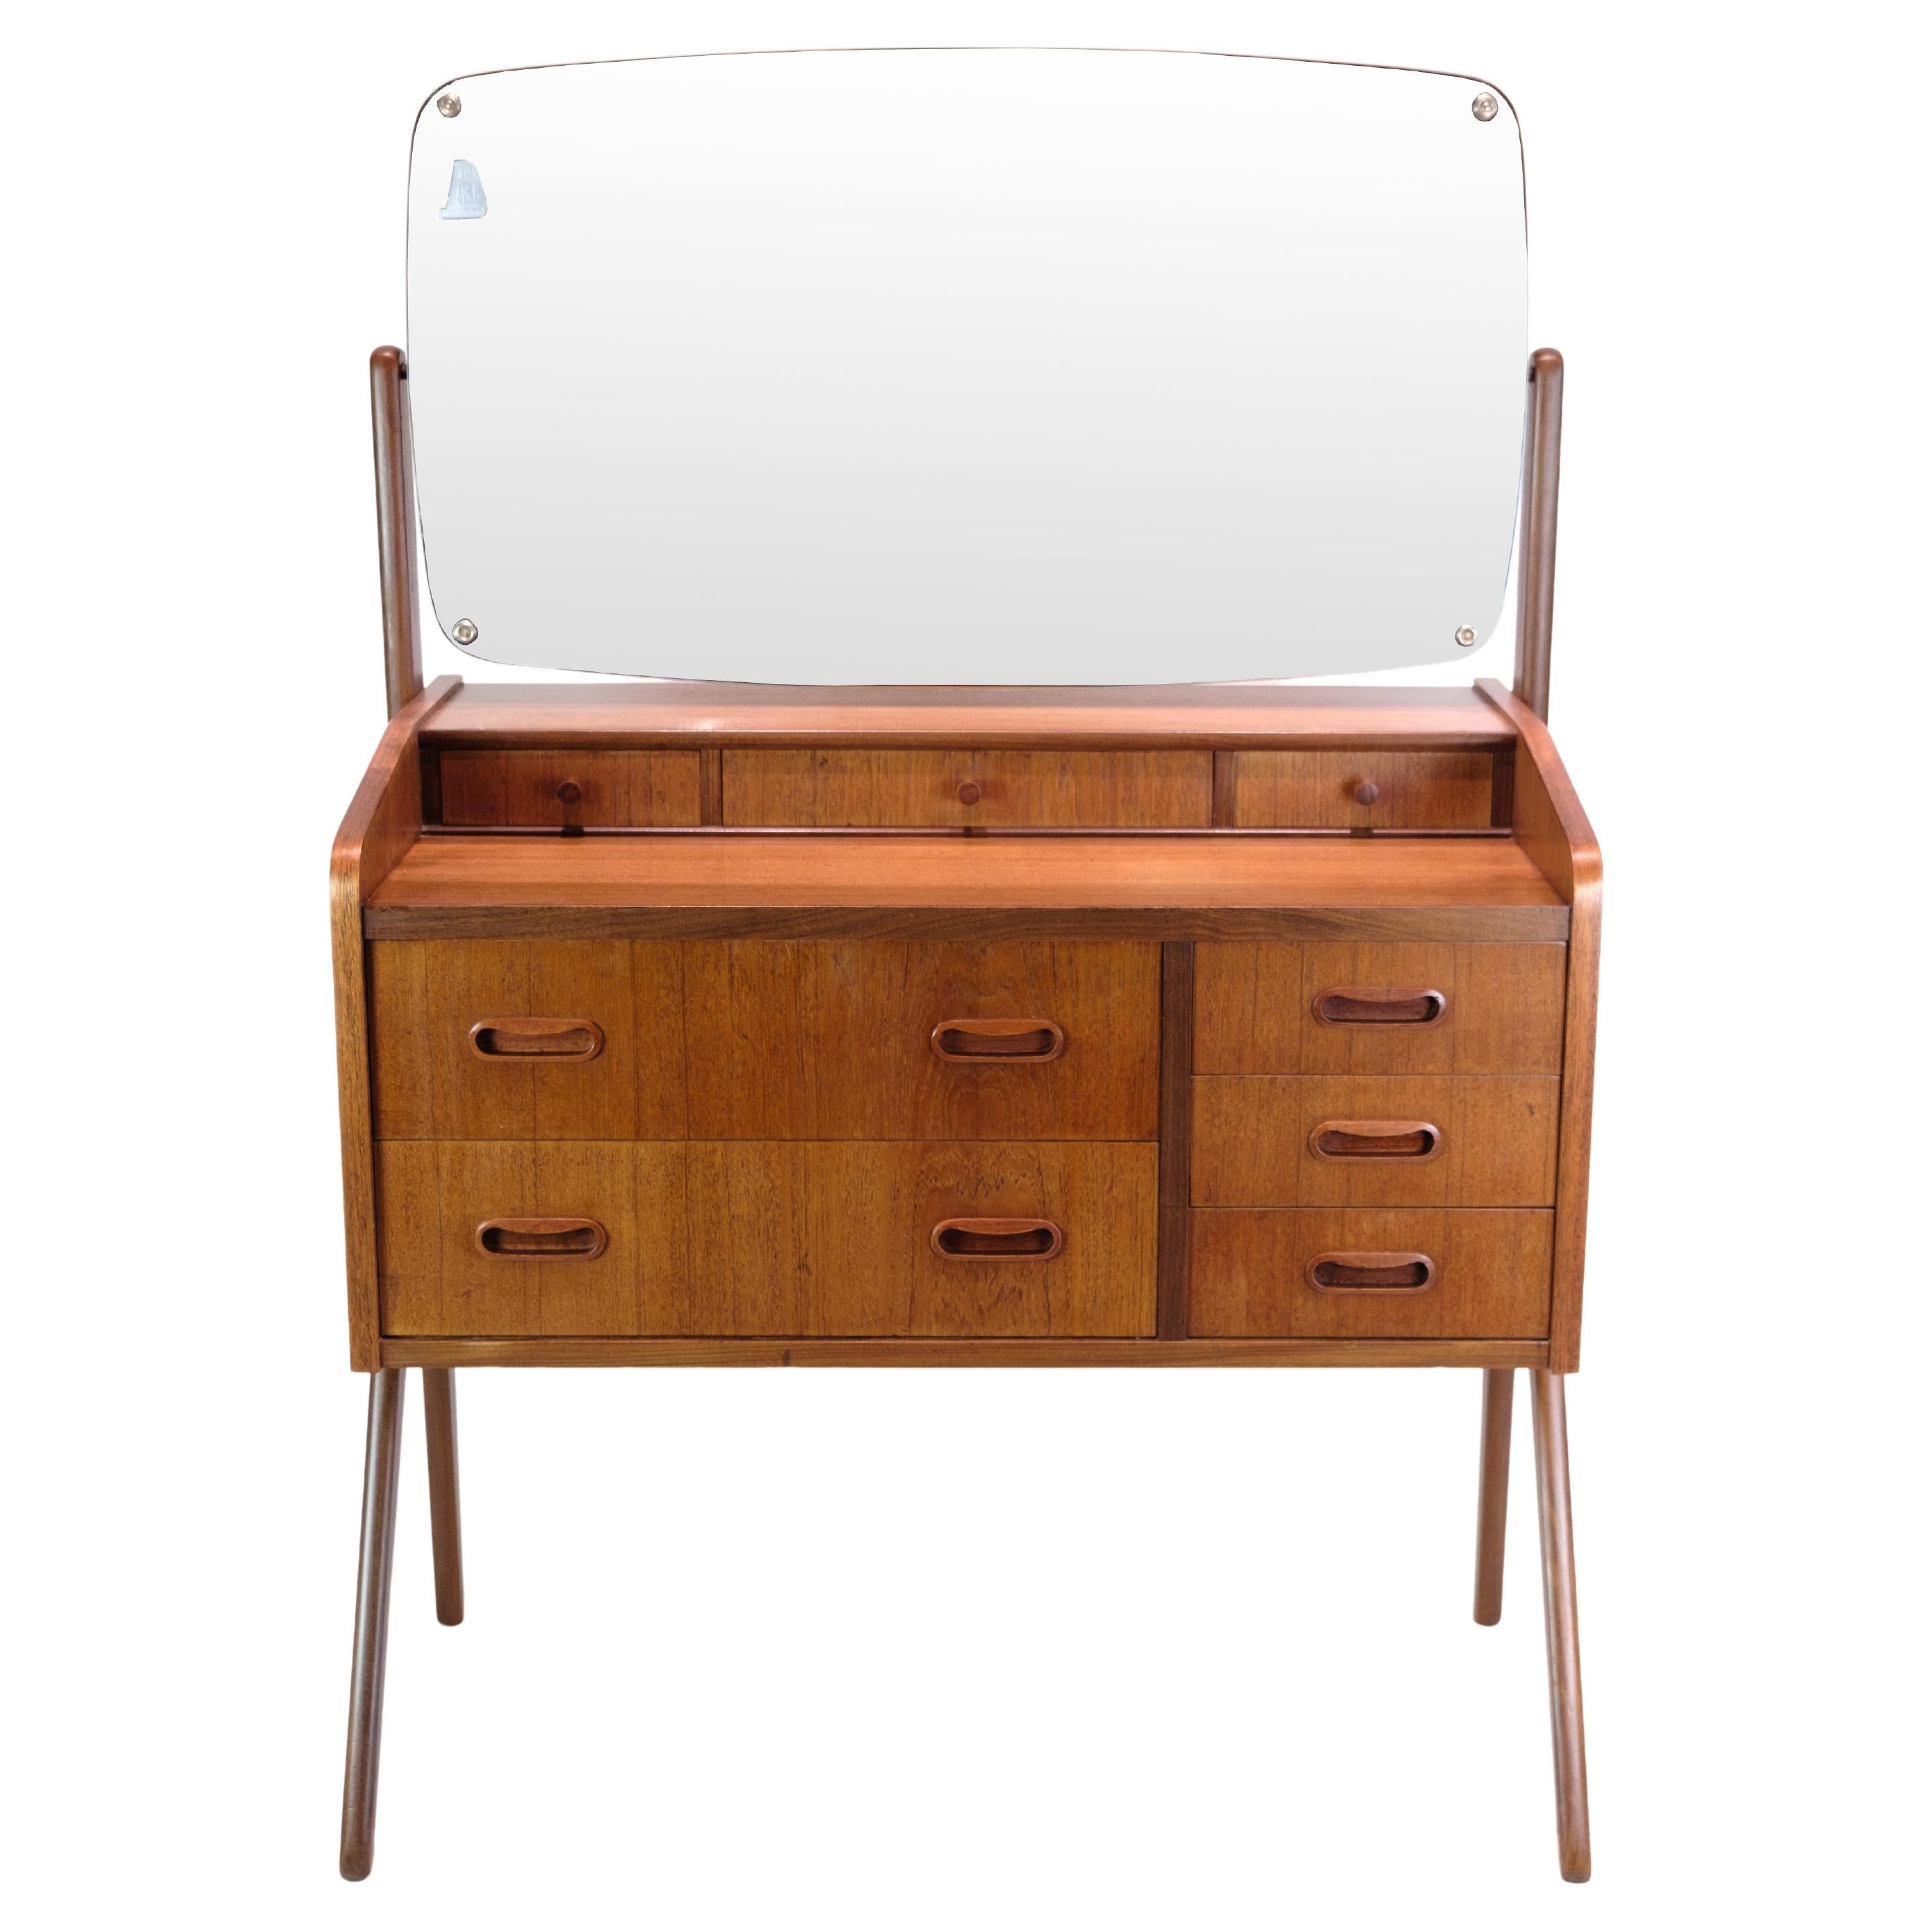 Dresser with Mirror Made In Teak, Danish design From 1960s For Sale